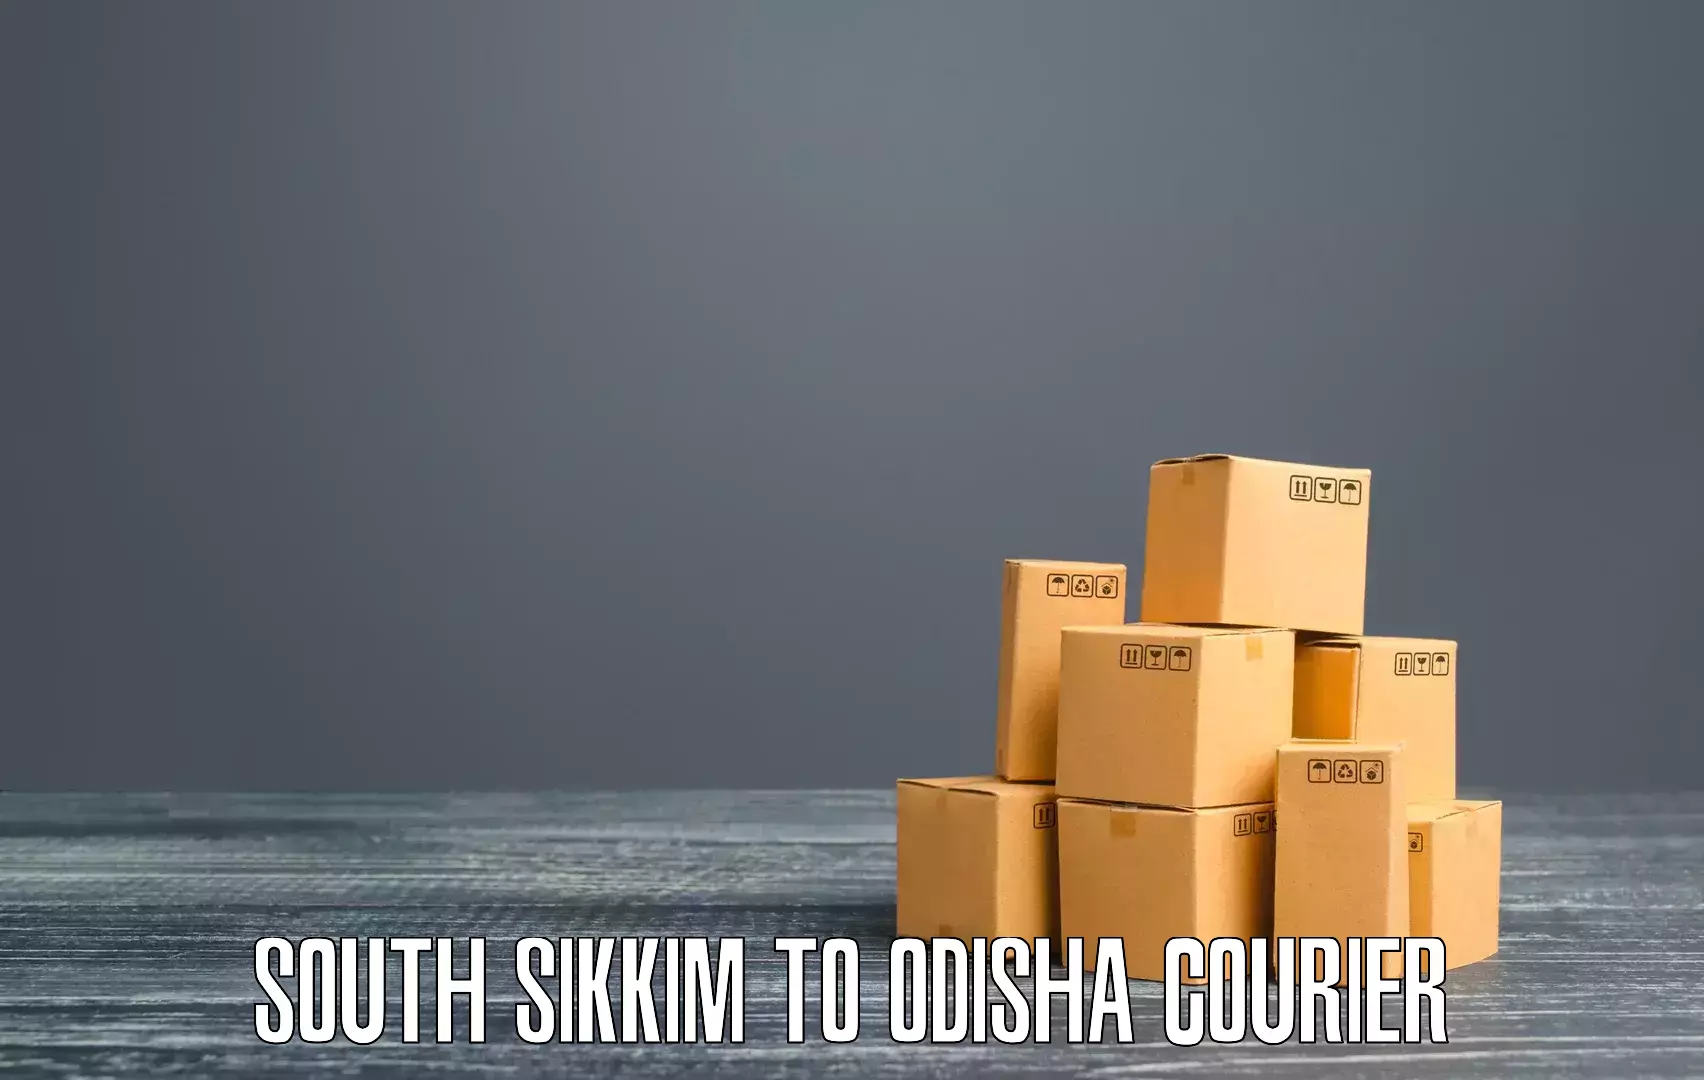 Nationwide shipping capabilities in South Sikkim to Mathili